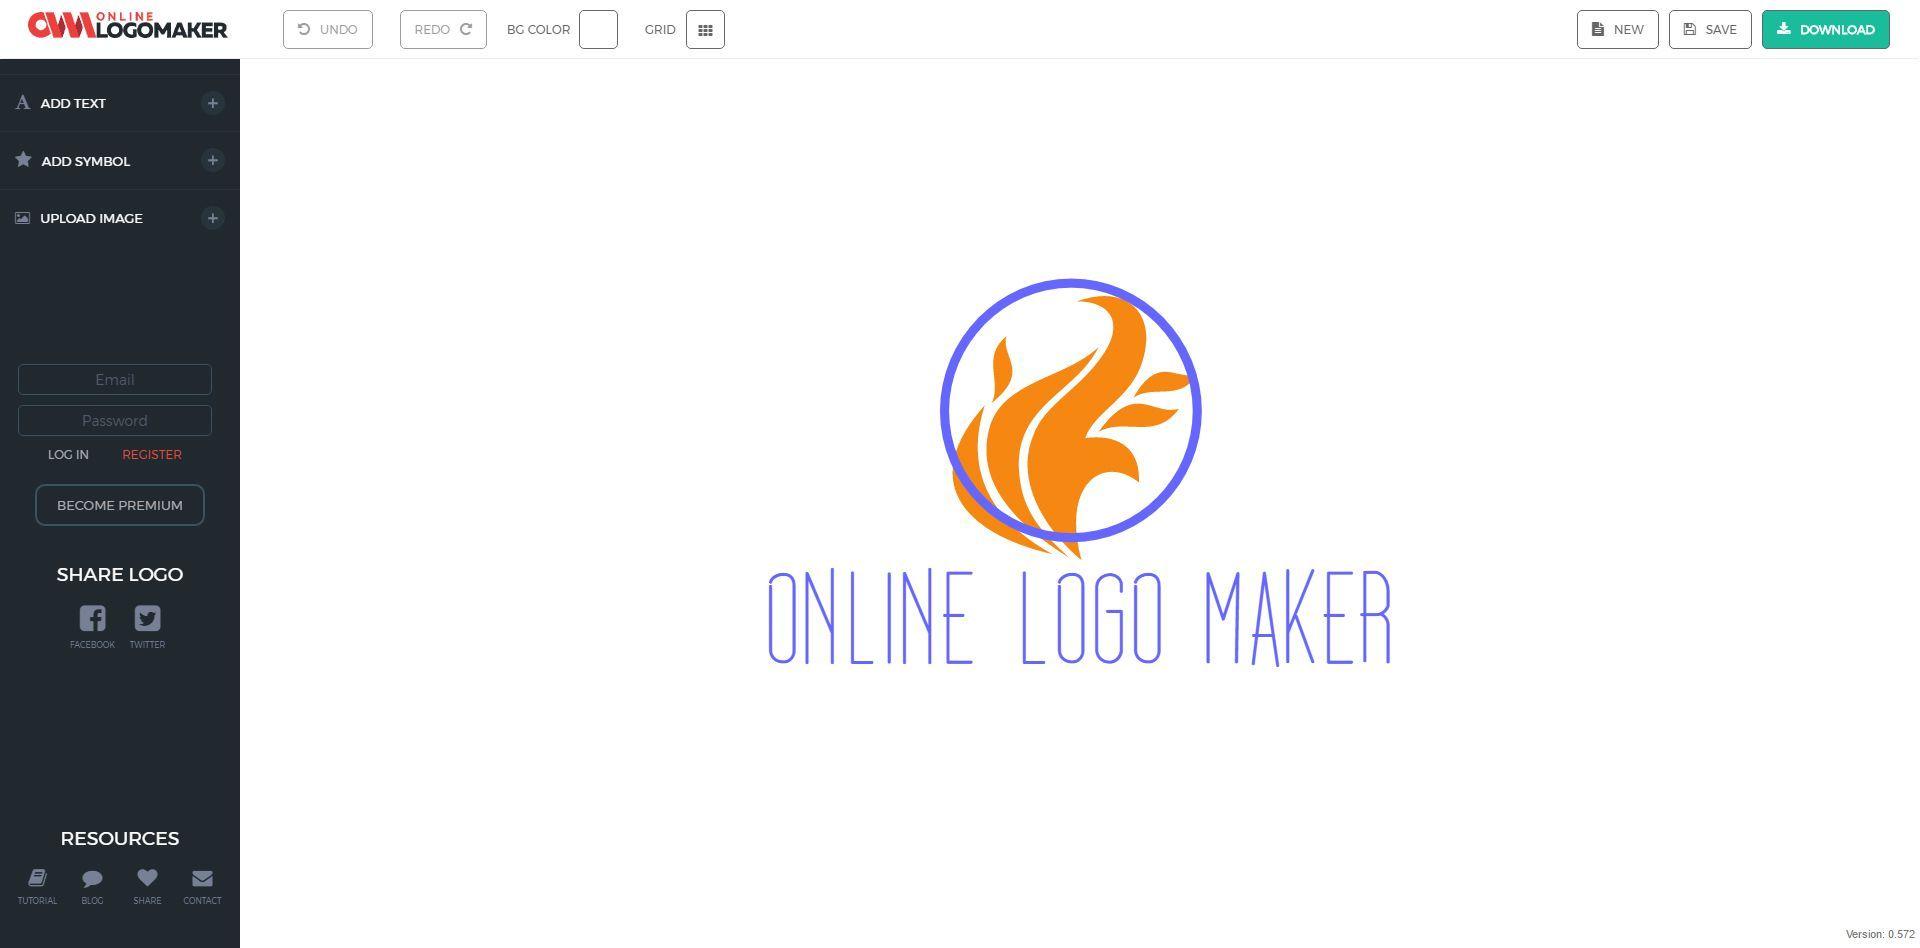 Lifewire Logo - 8 Free Online Logo Makers You've Got to Try